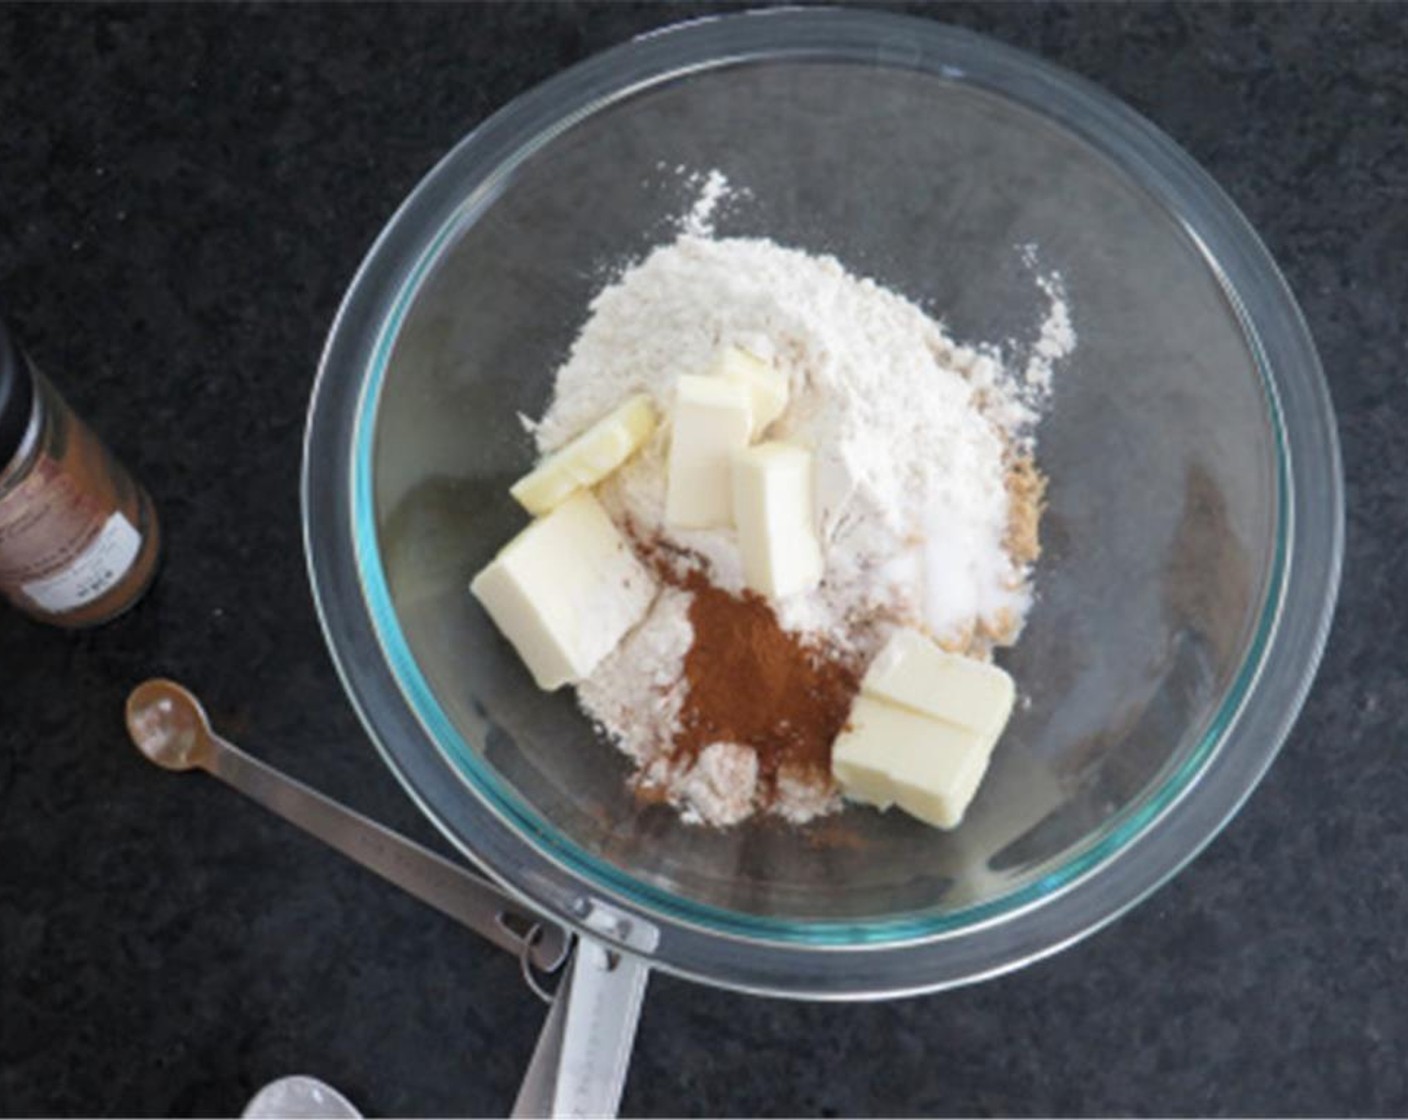 step 4 In a medium bowl, combine the Brown Sugar (1/2 cup), All-Purpose Flour (1/2 cup), Salt (1/4 tsp), and Ground Cinnamon (1/4 tsp). Add chilled unsalted butter.